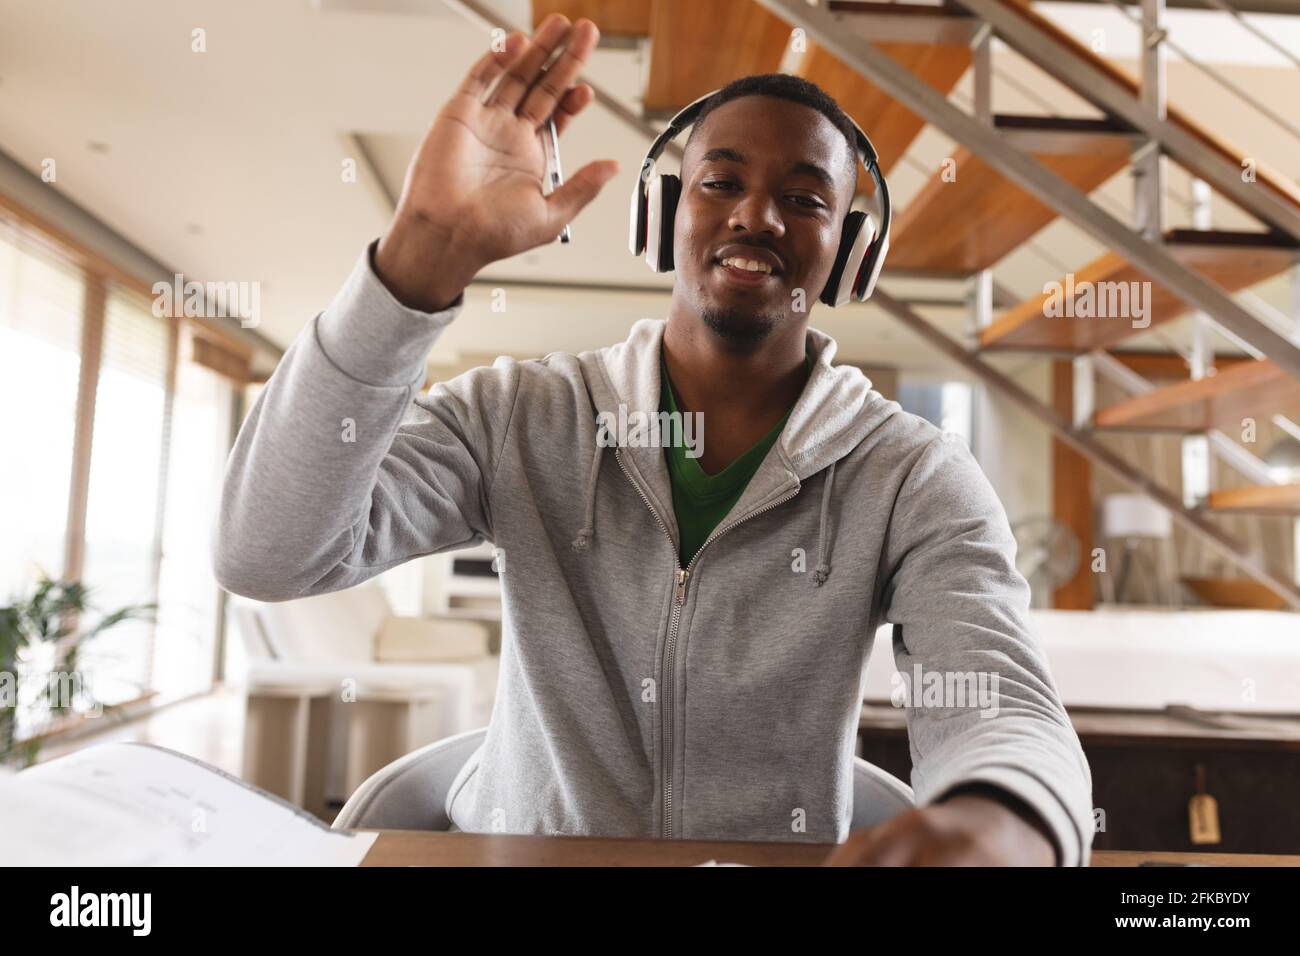 Portrait of african american young man wearing headphones waving while looking at the camera Stock Photo